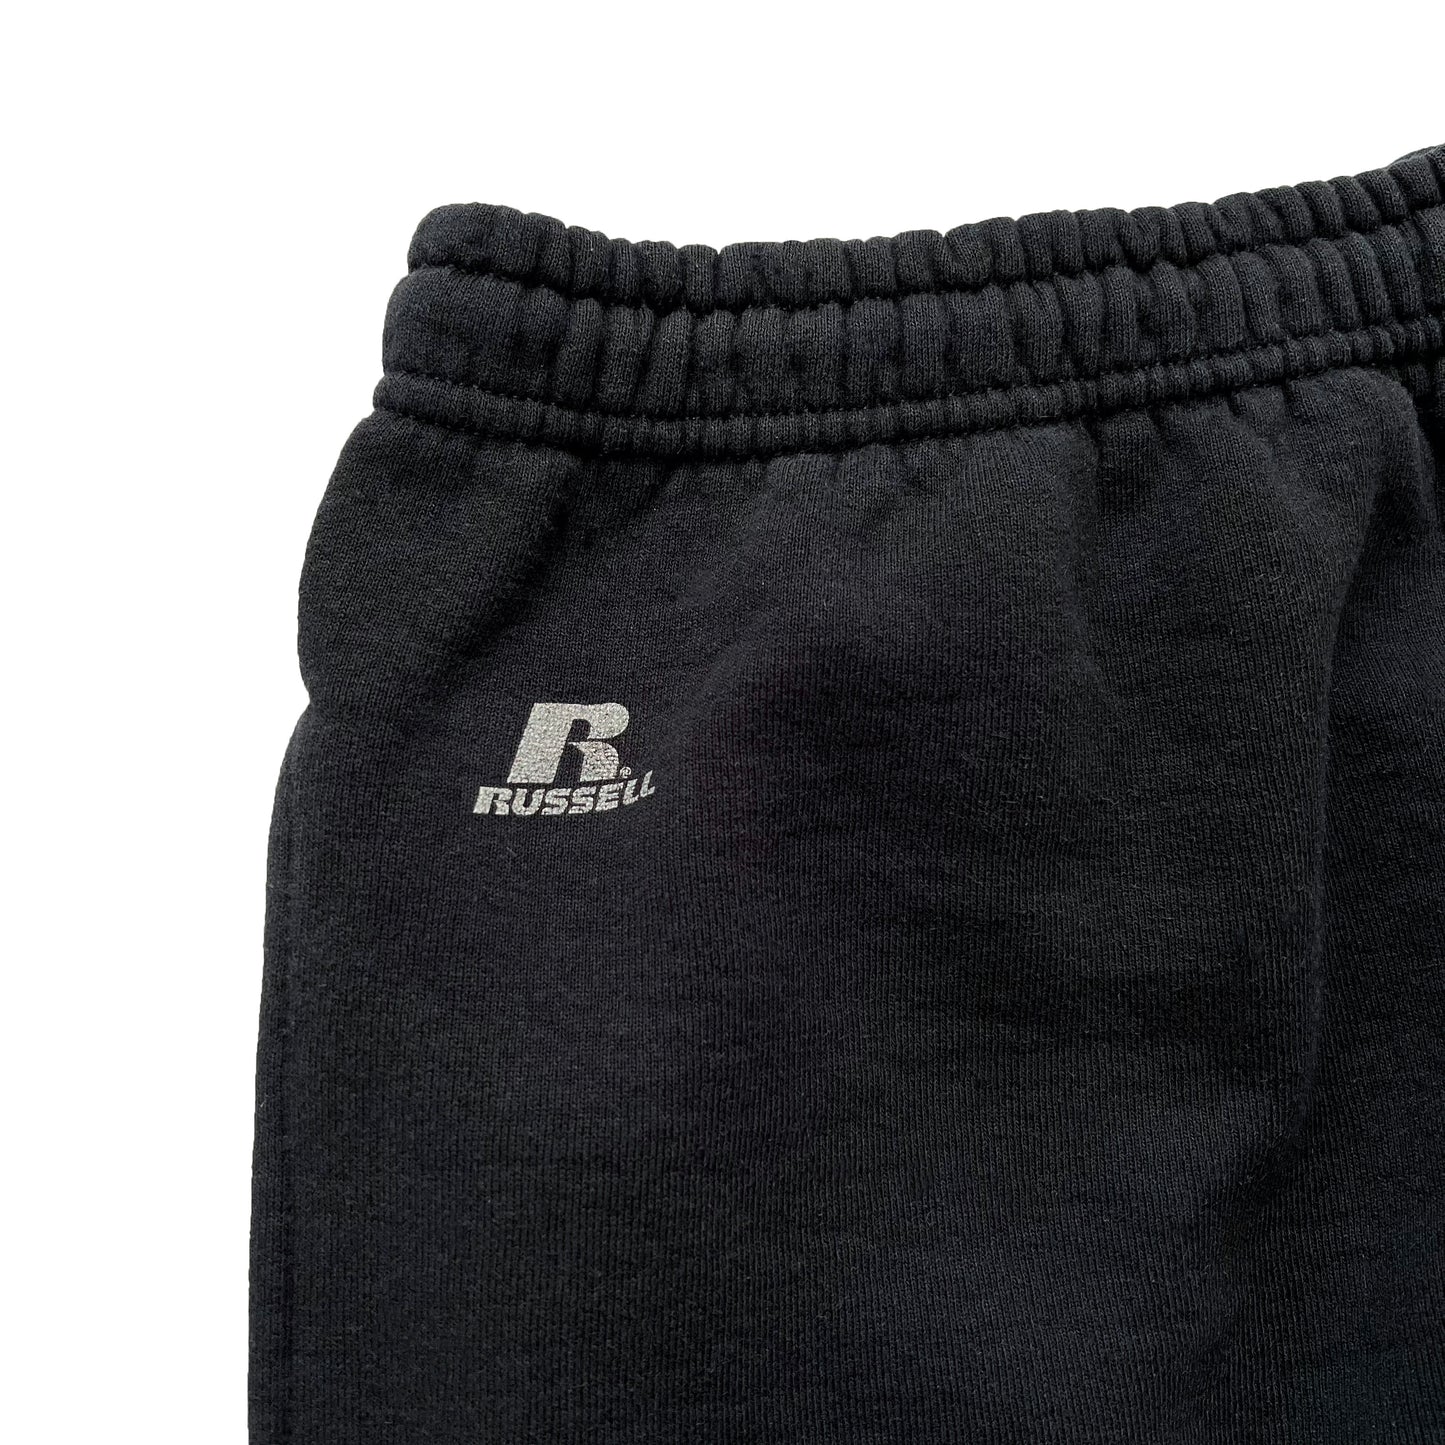 00's RUSSELL ATHLETIC SWEAT TRACK PANTS